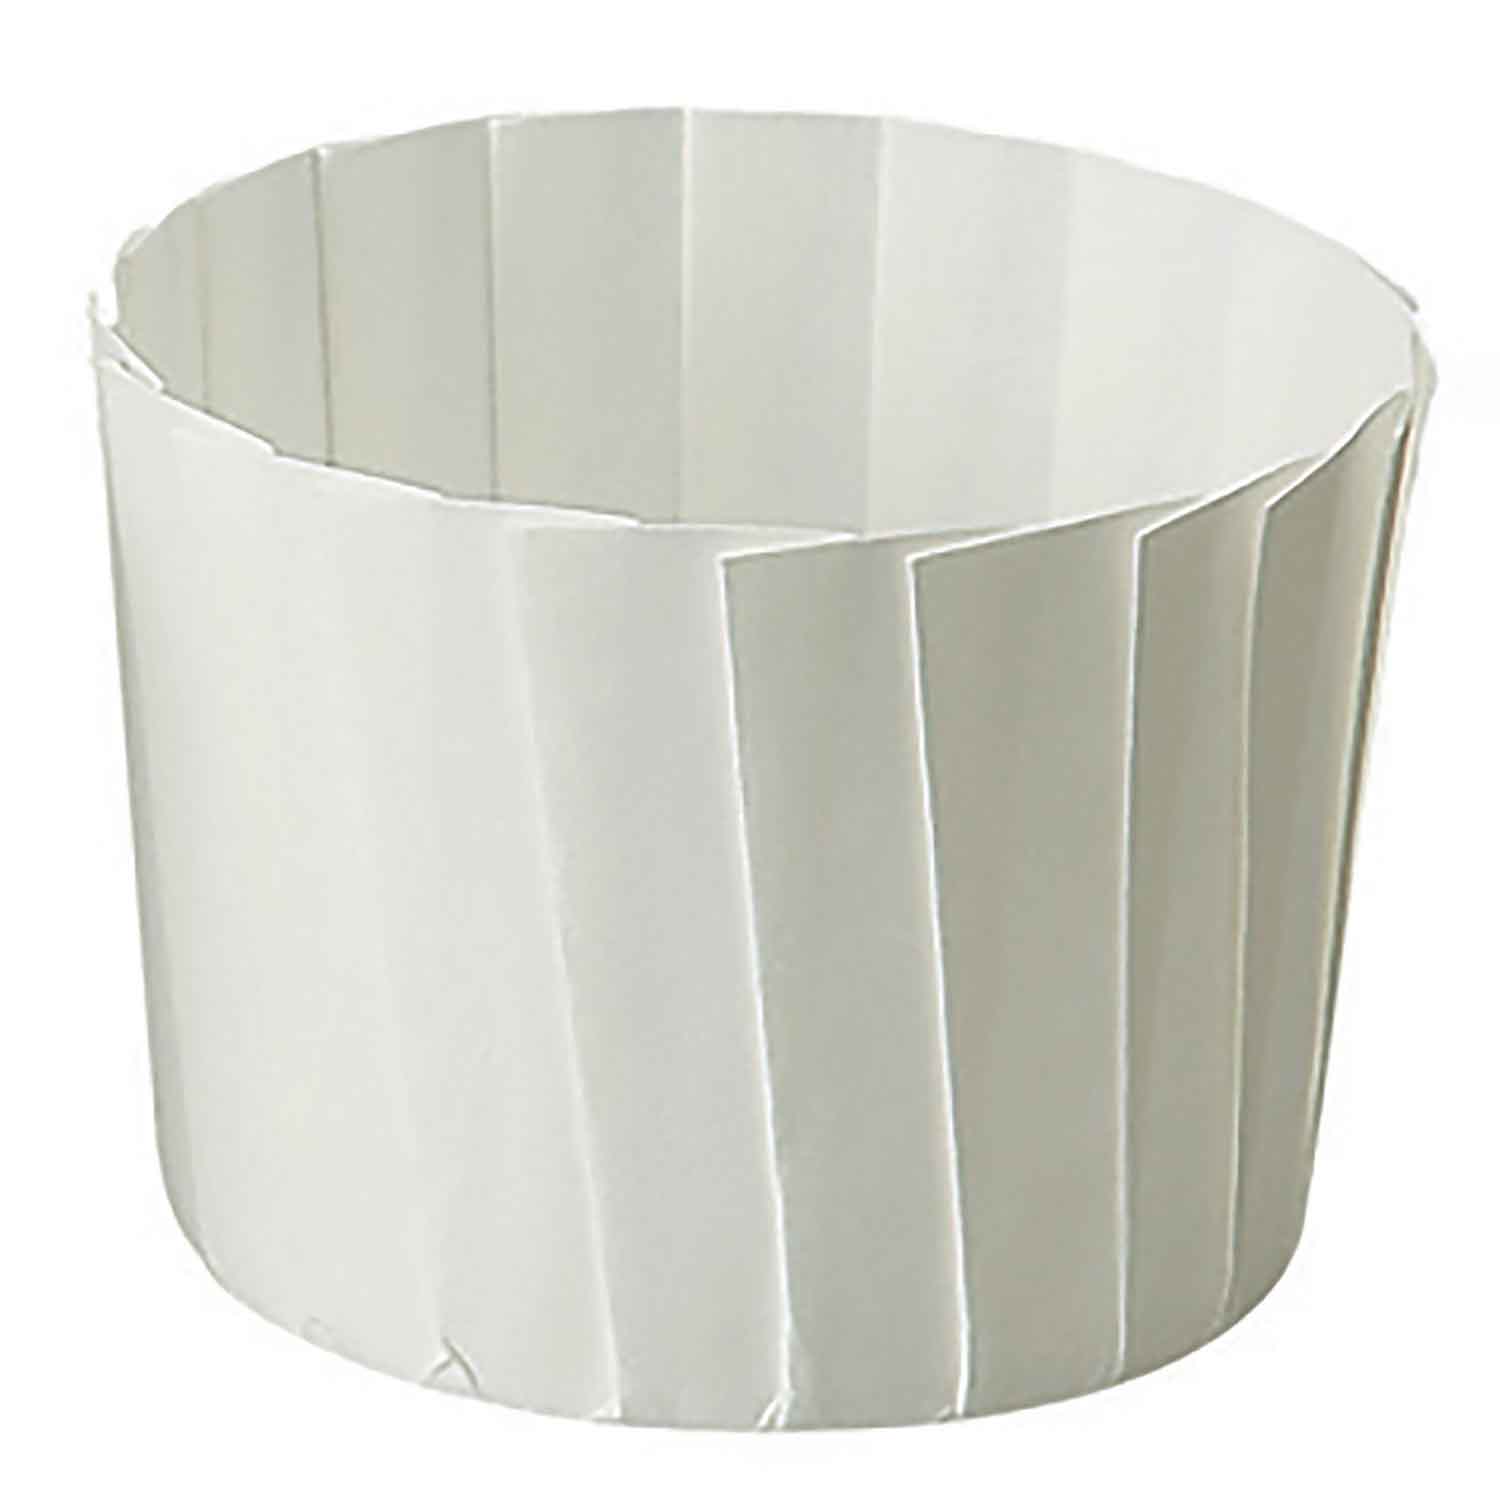 Pleated White Baking Cups - 5.1 oz